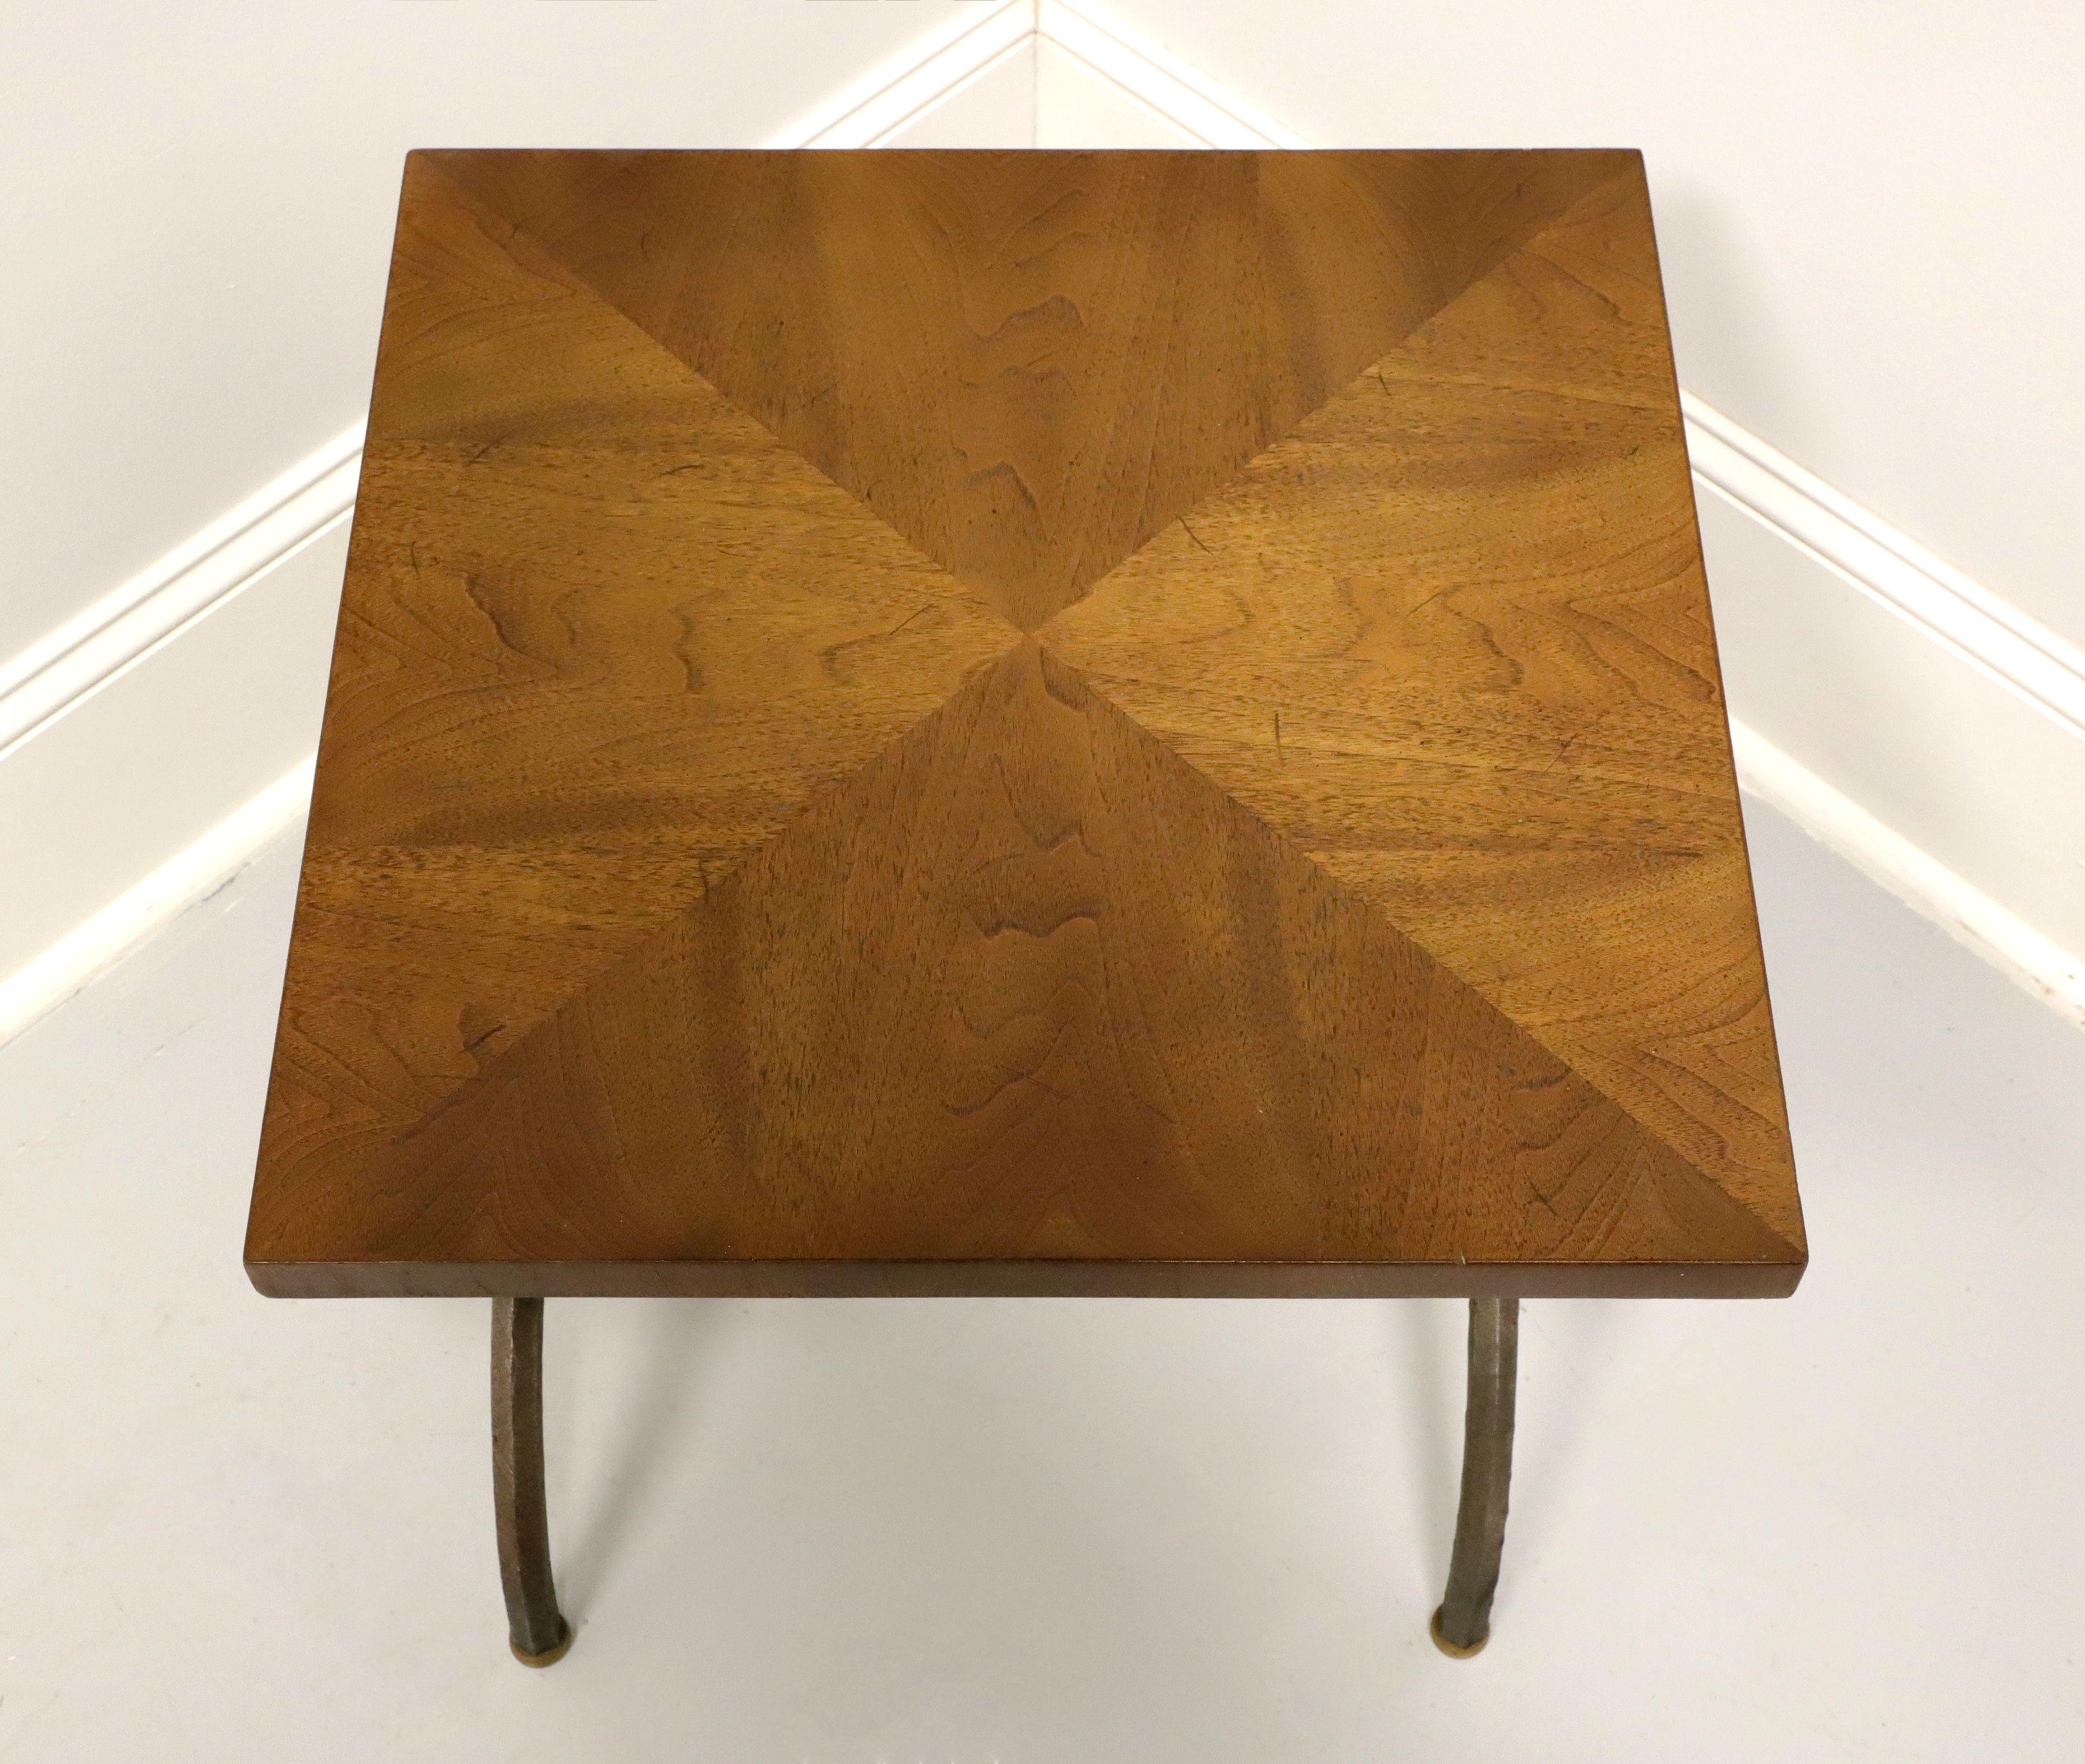 American TOMLINSON 1960's Walnut Square Cocktail Table with Metal Legs - A